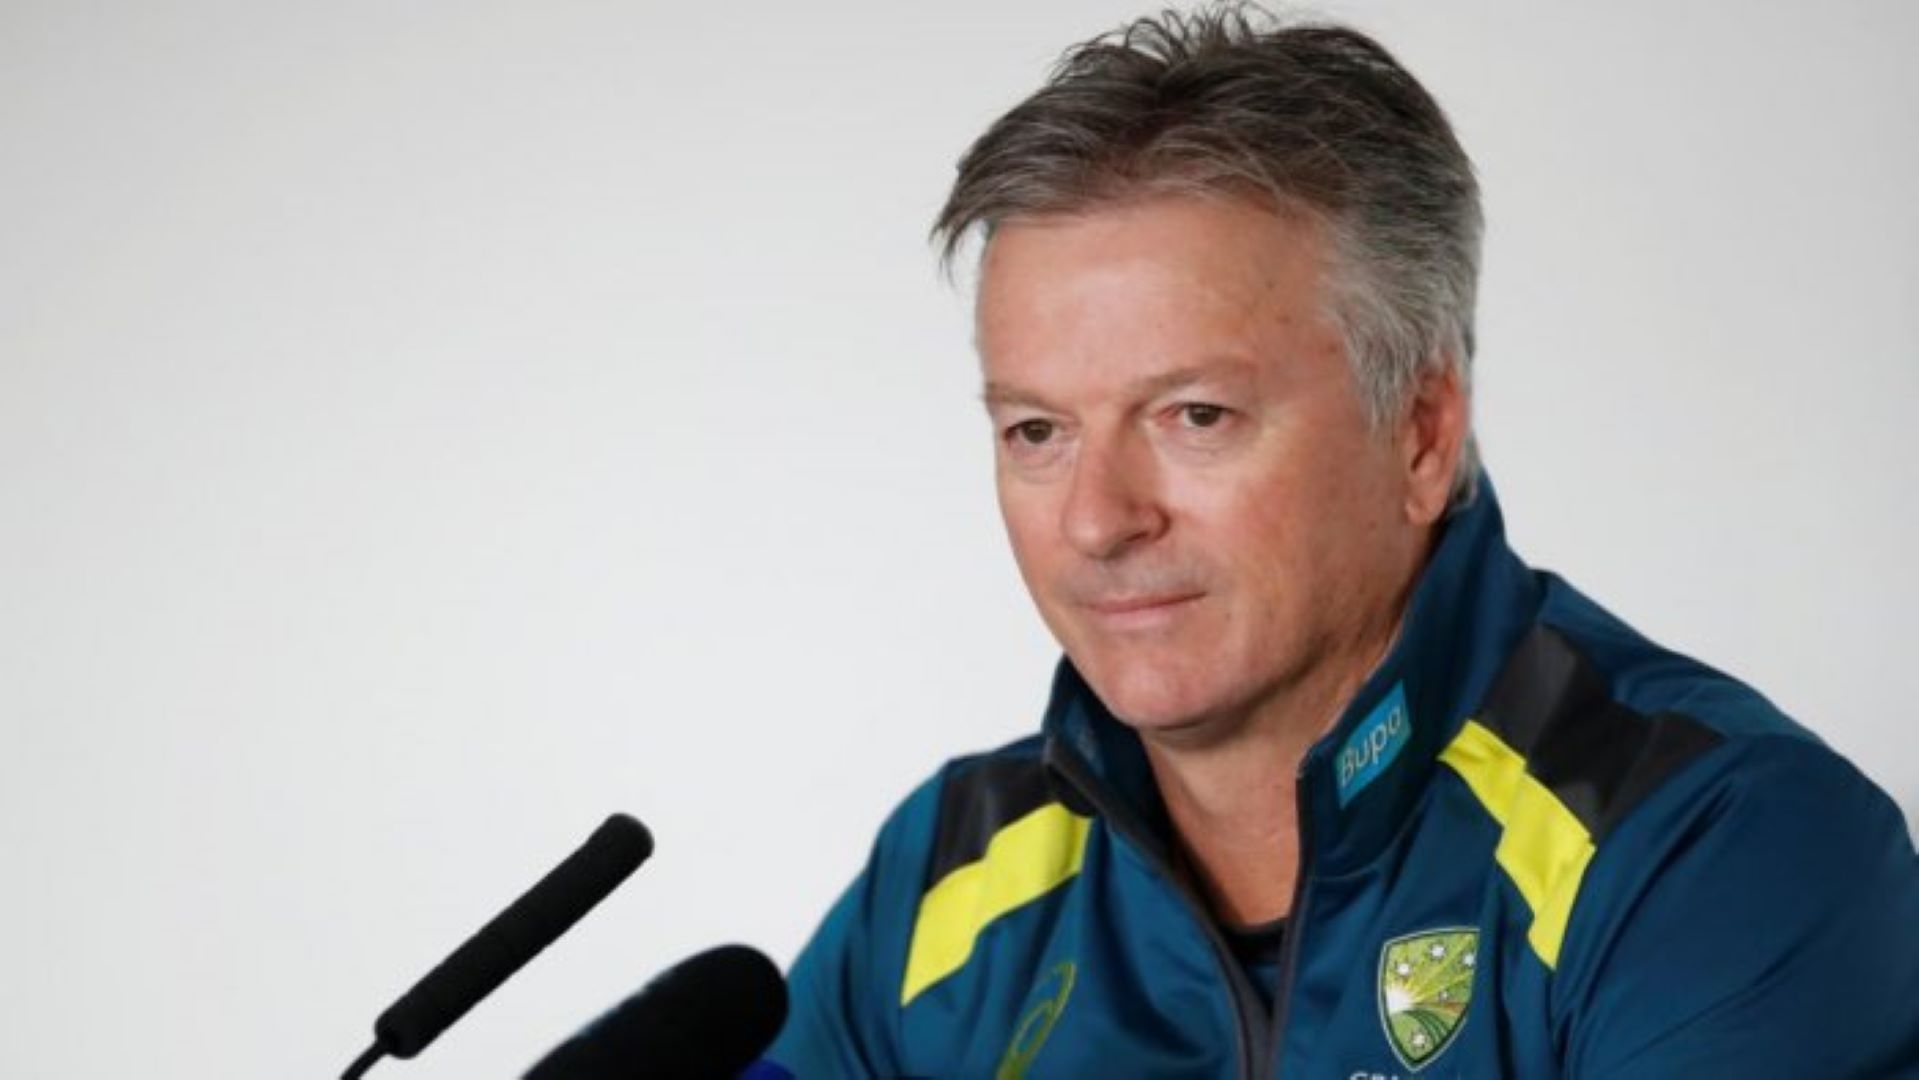 Steve Waugh led Australia to Ashes glory in the 2001 and 2002/03 series